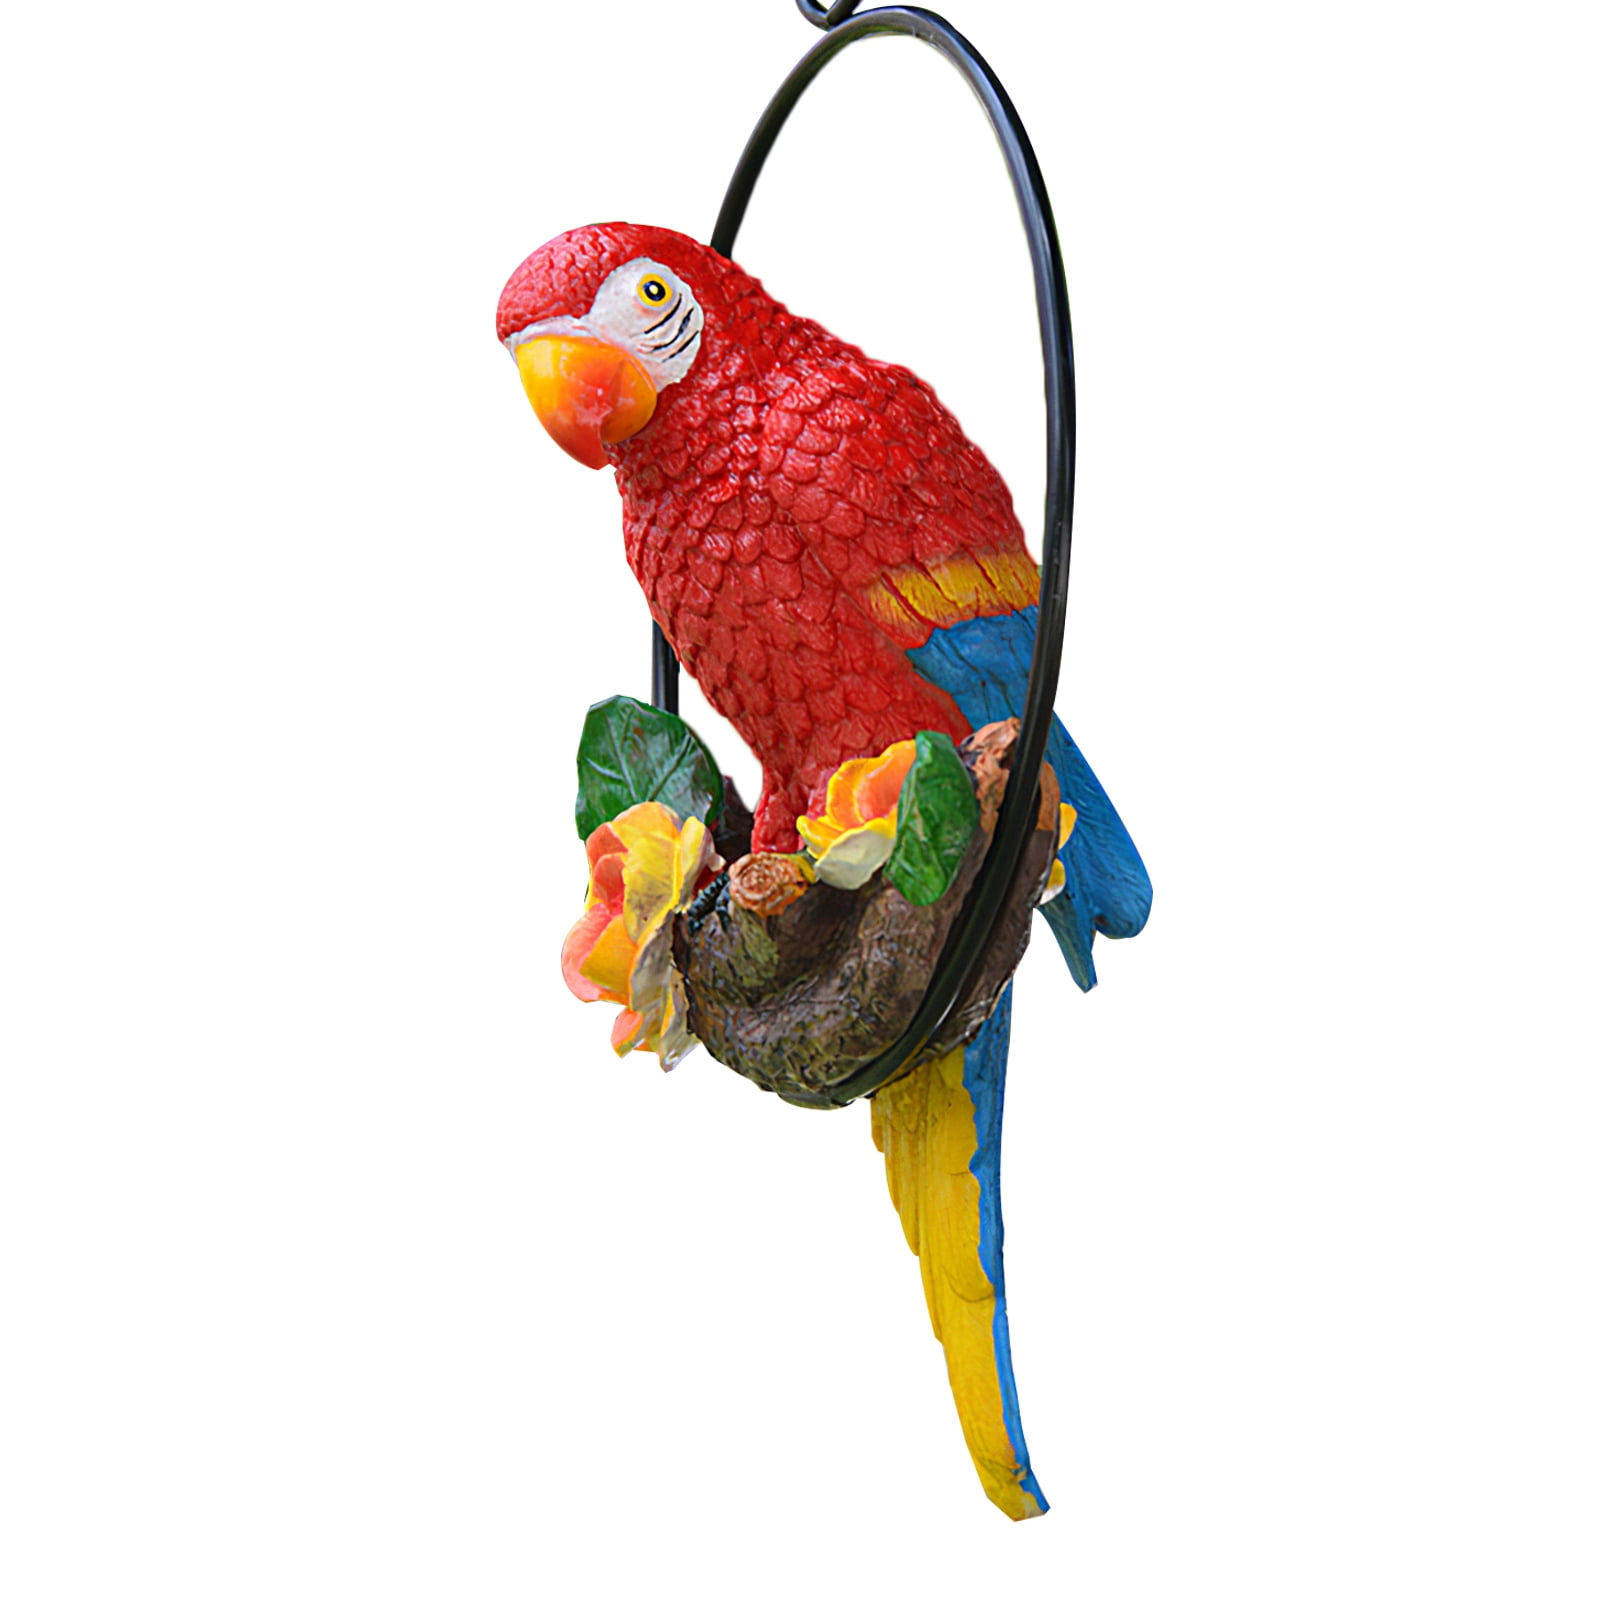 COLORFUL GREEN STANDING METAL PARROT LARGE 16" TROPICAL FUN BIRD FIGURINE STATUE 